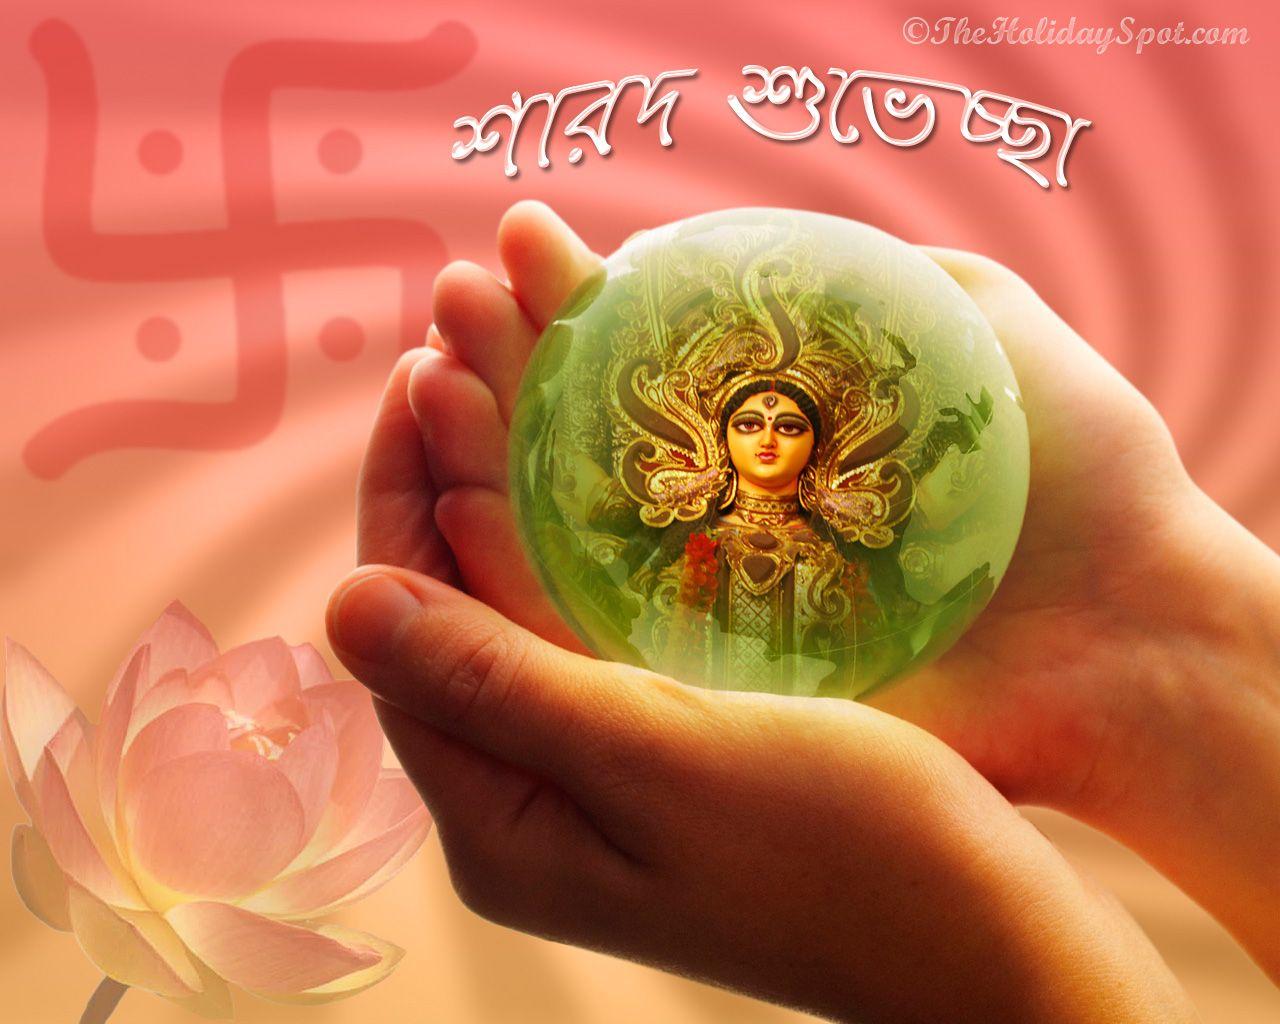 Wallpaper for Durga puja, its free, download now!